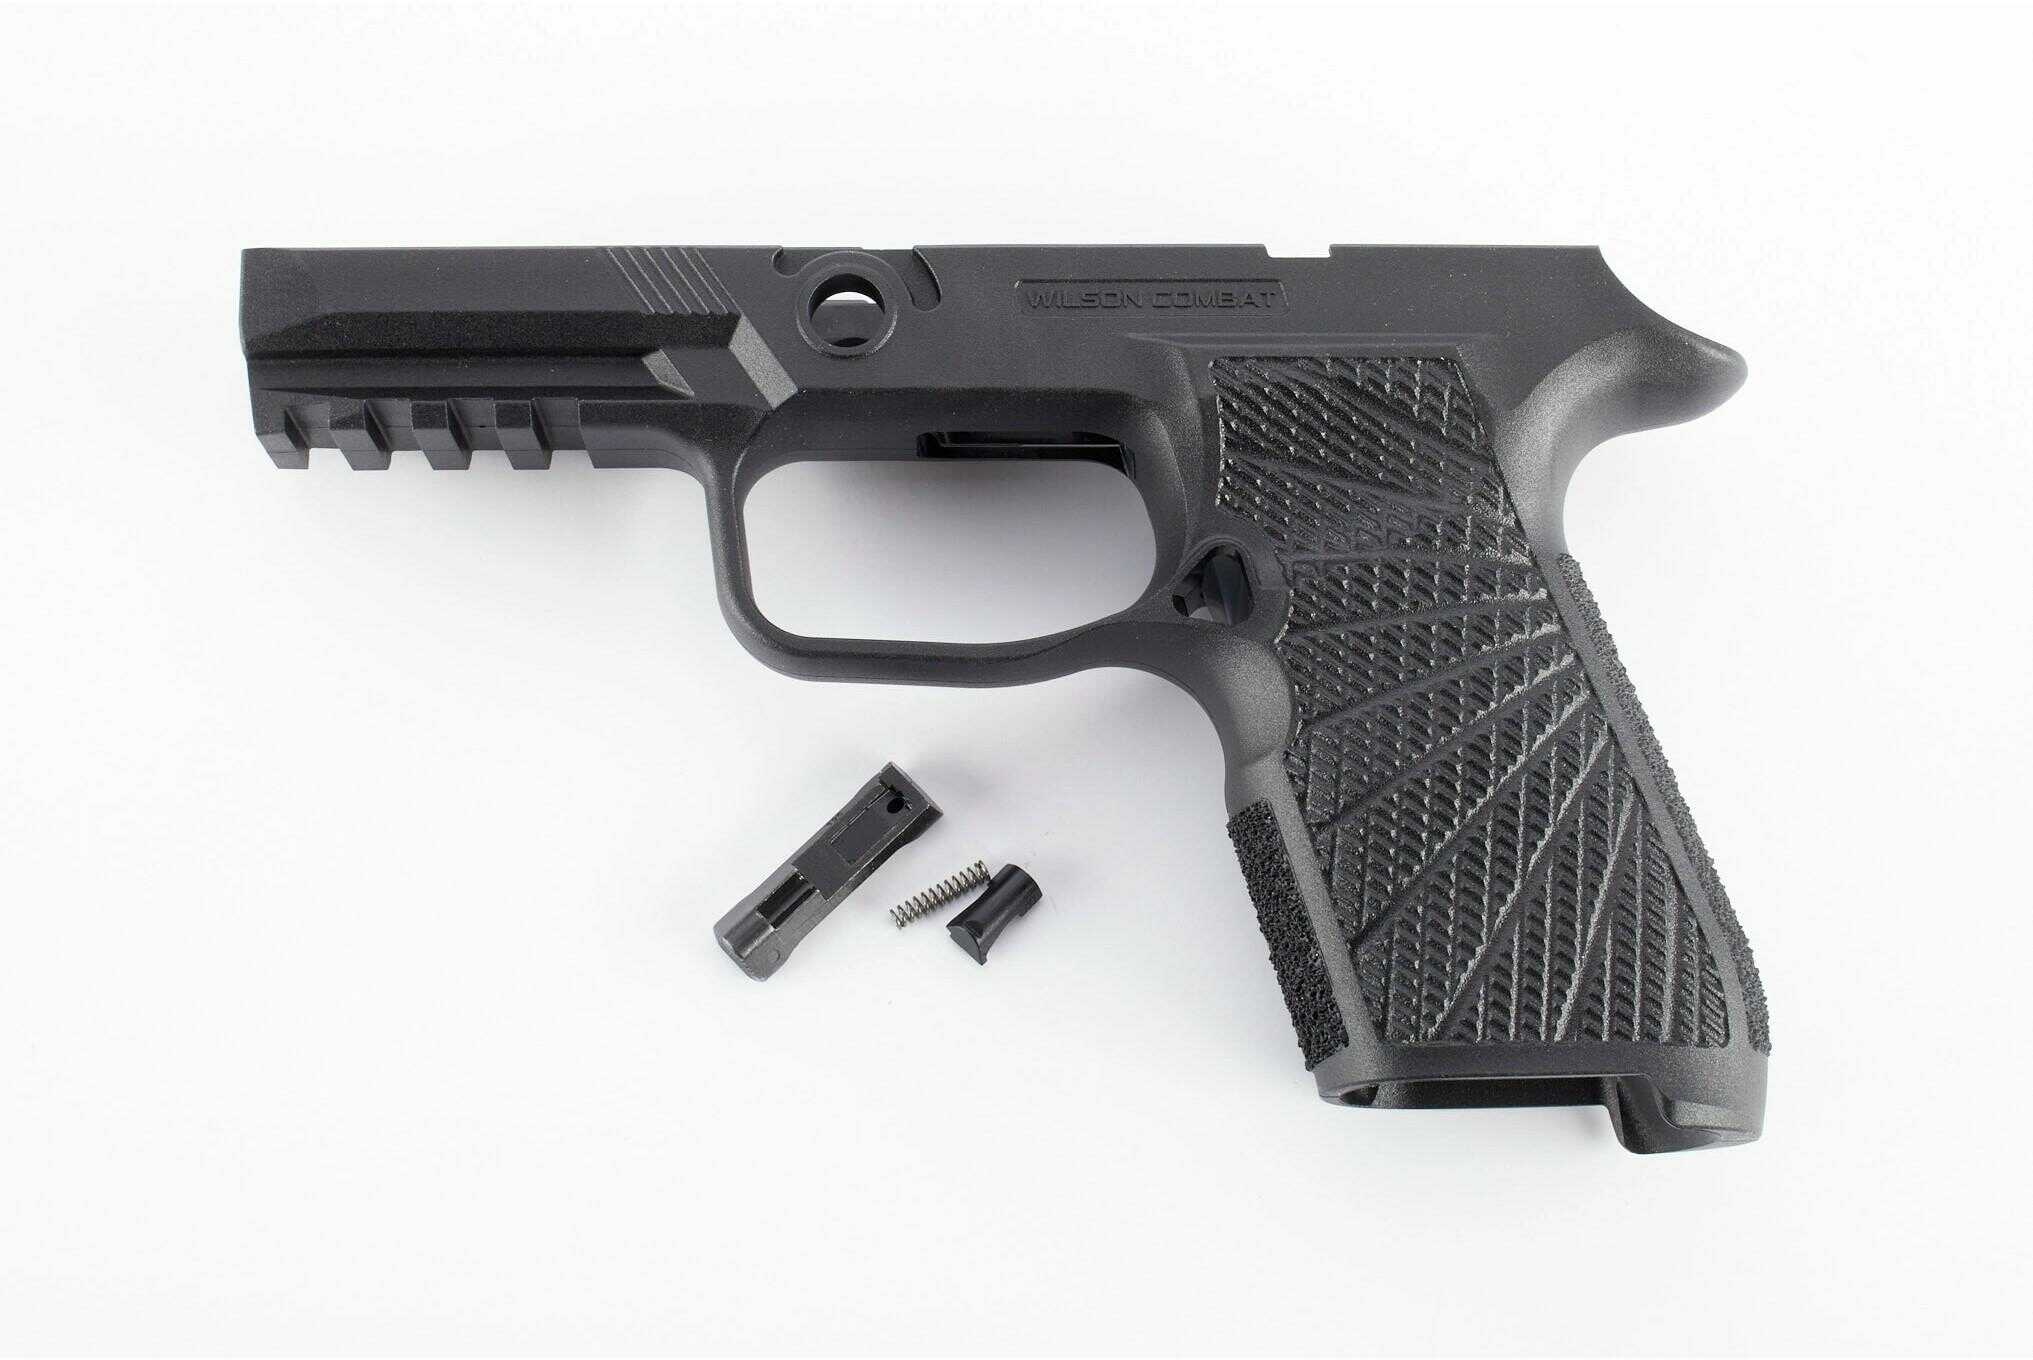 Wilson Combat Grip Module Compact Fits Sig P320 No Manual Safety Black 320-ccsb